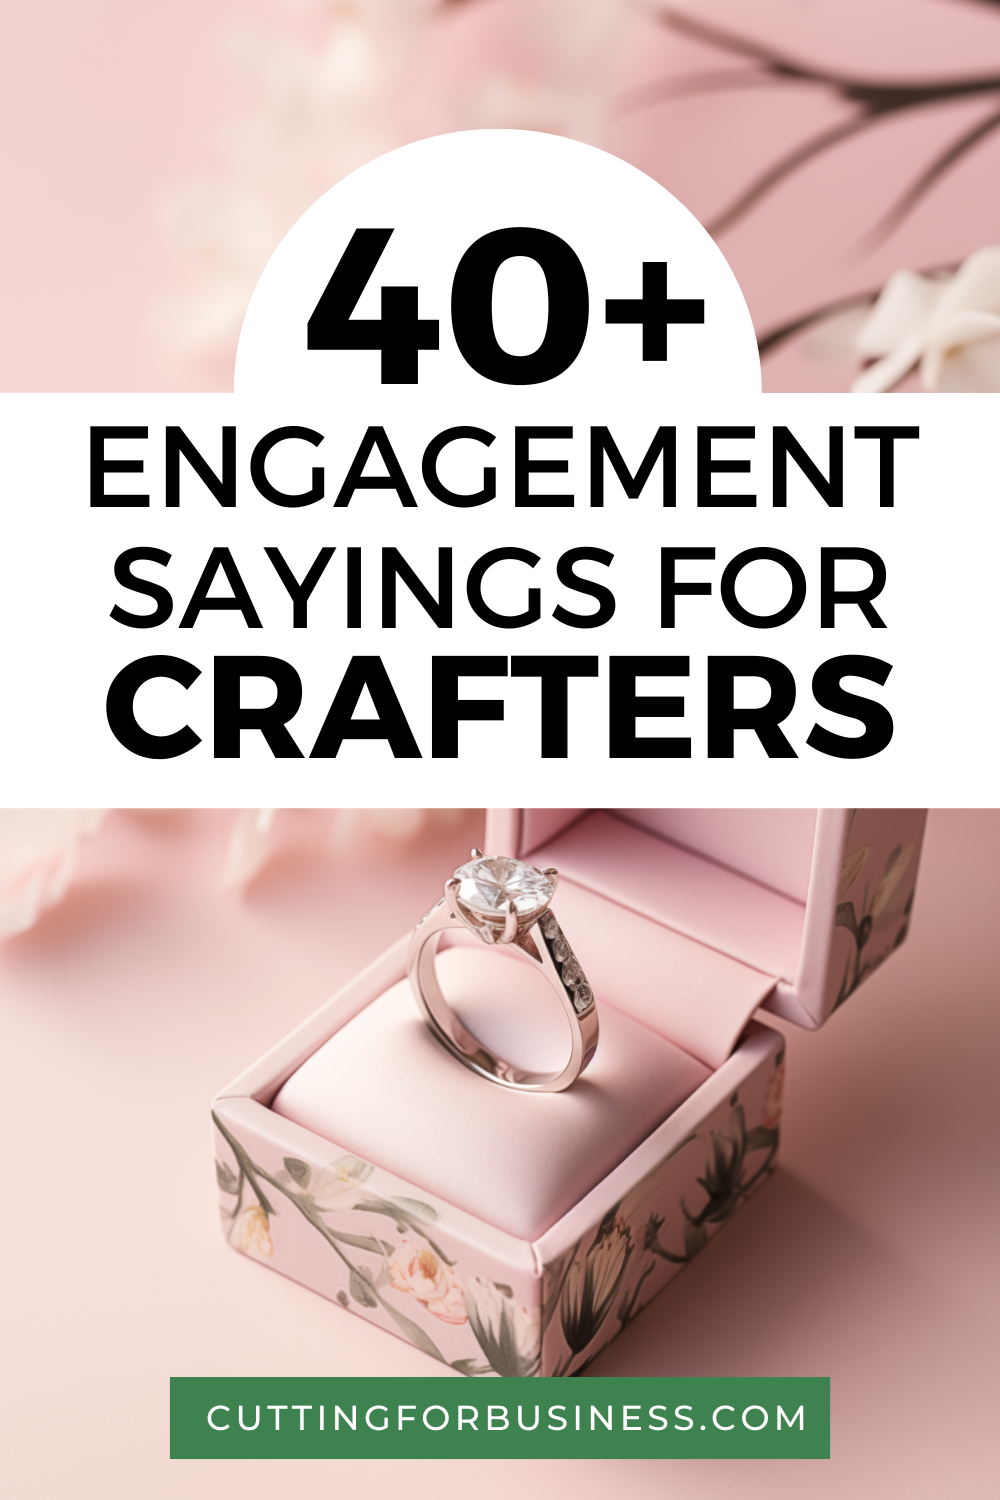 40+ Engagement Sayings for Crafters - cuttingforbusiness.com